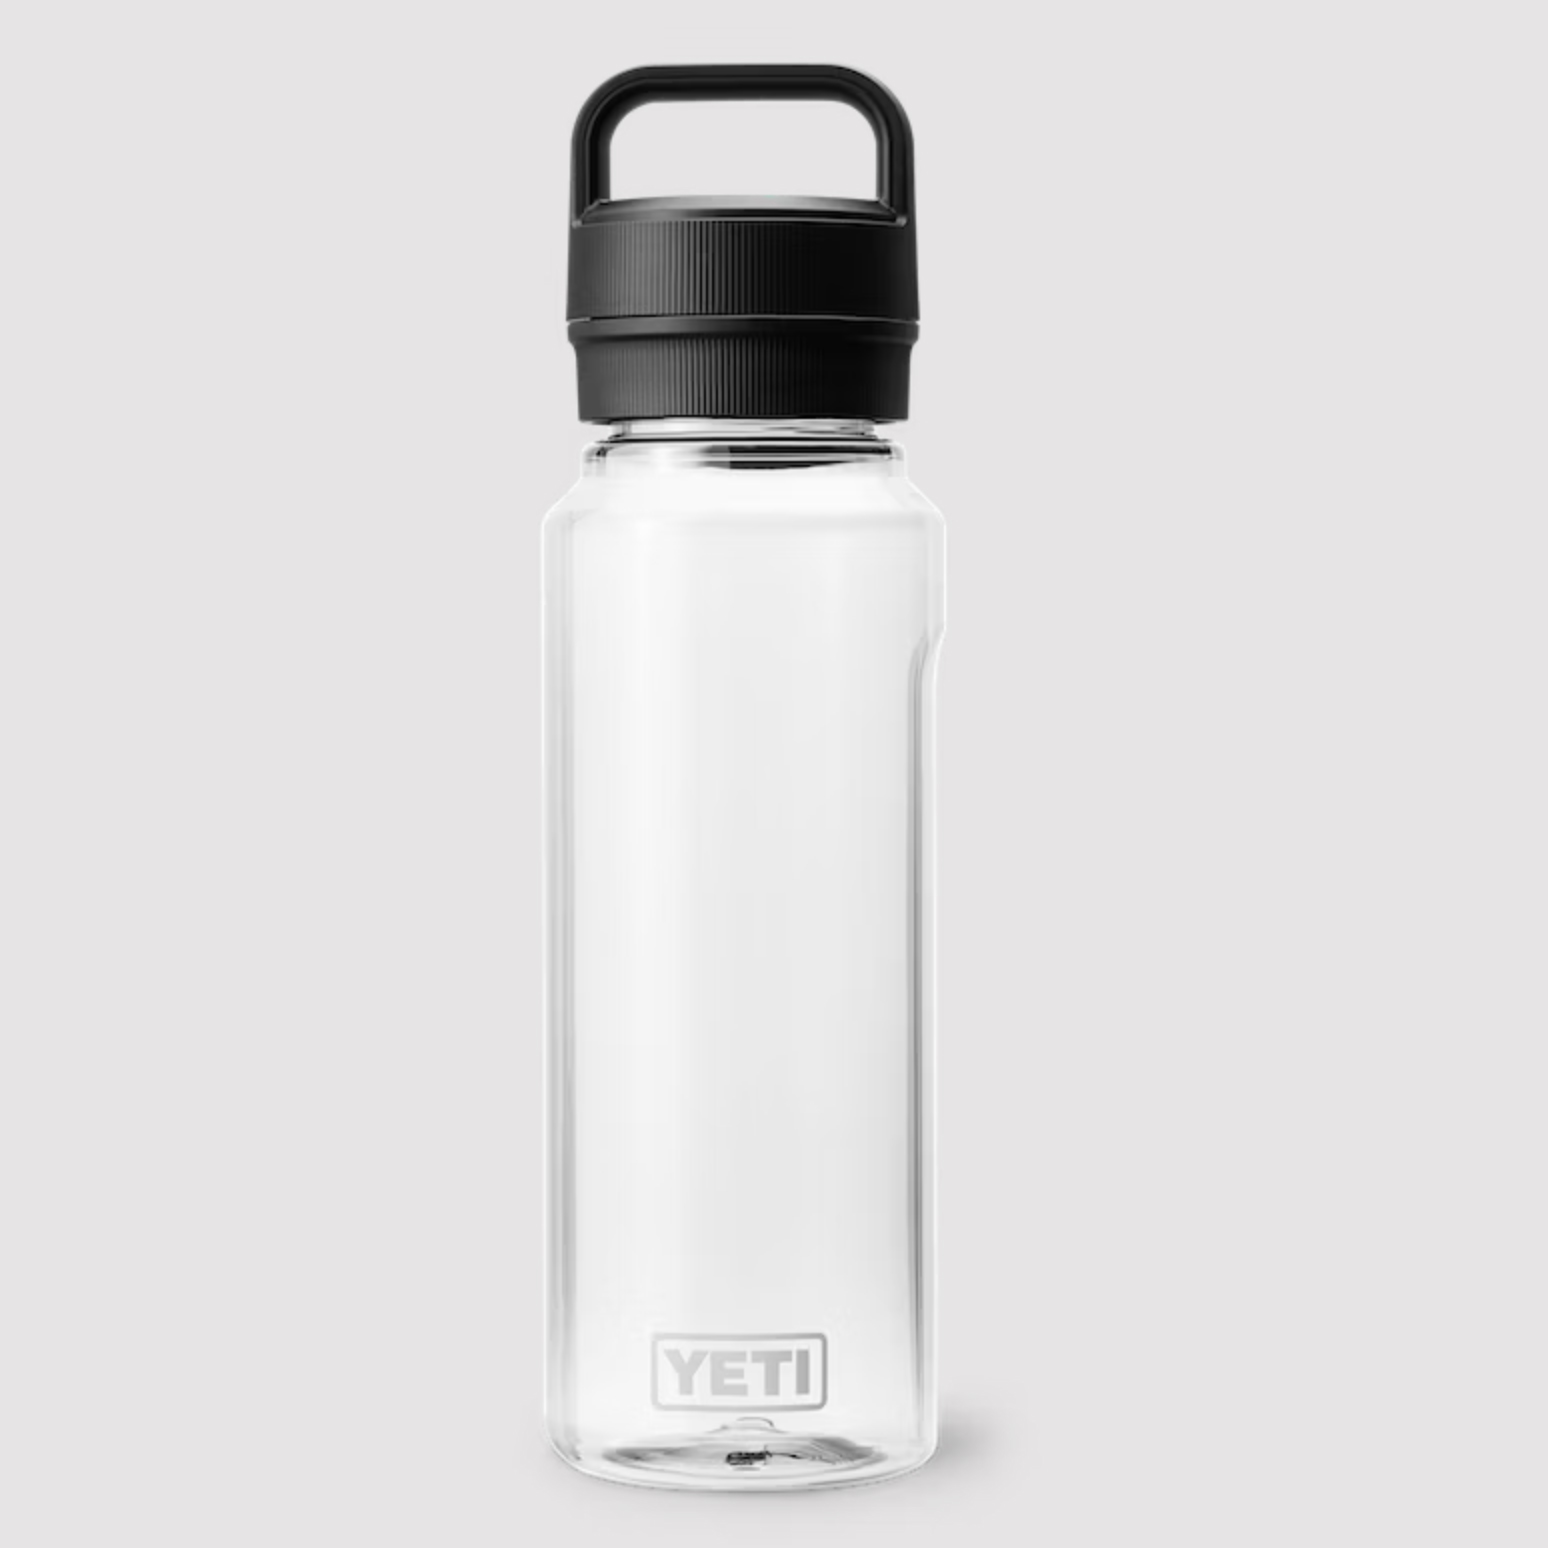 clear Yonder 34 OZ Water Bottle with black lid